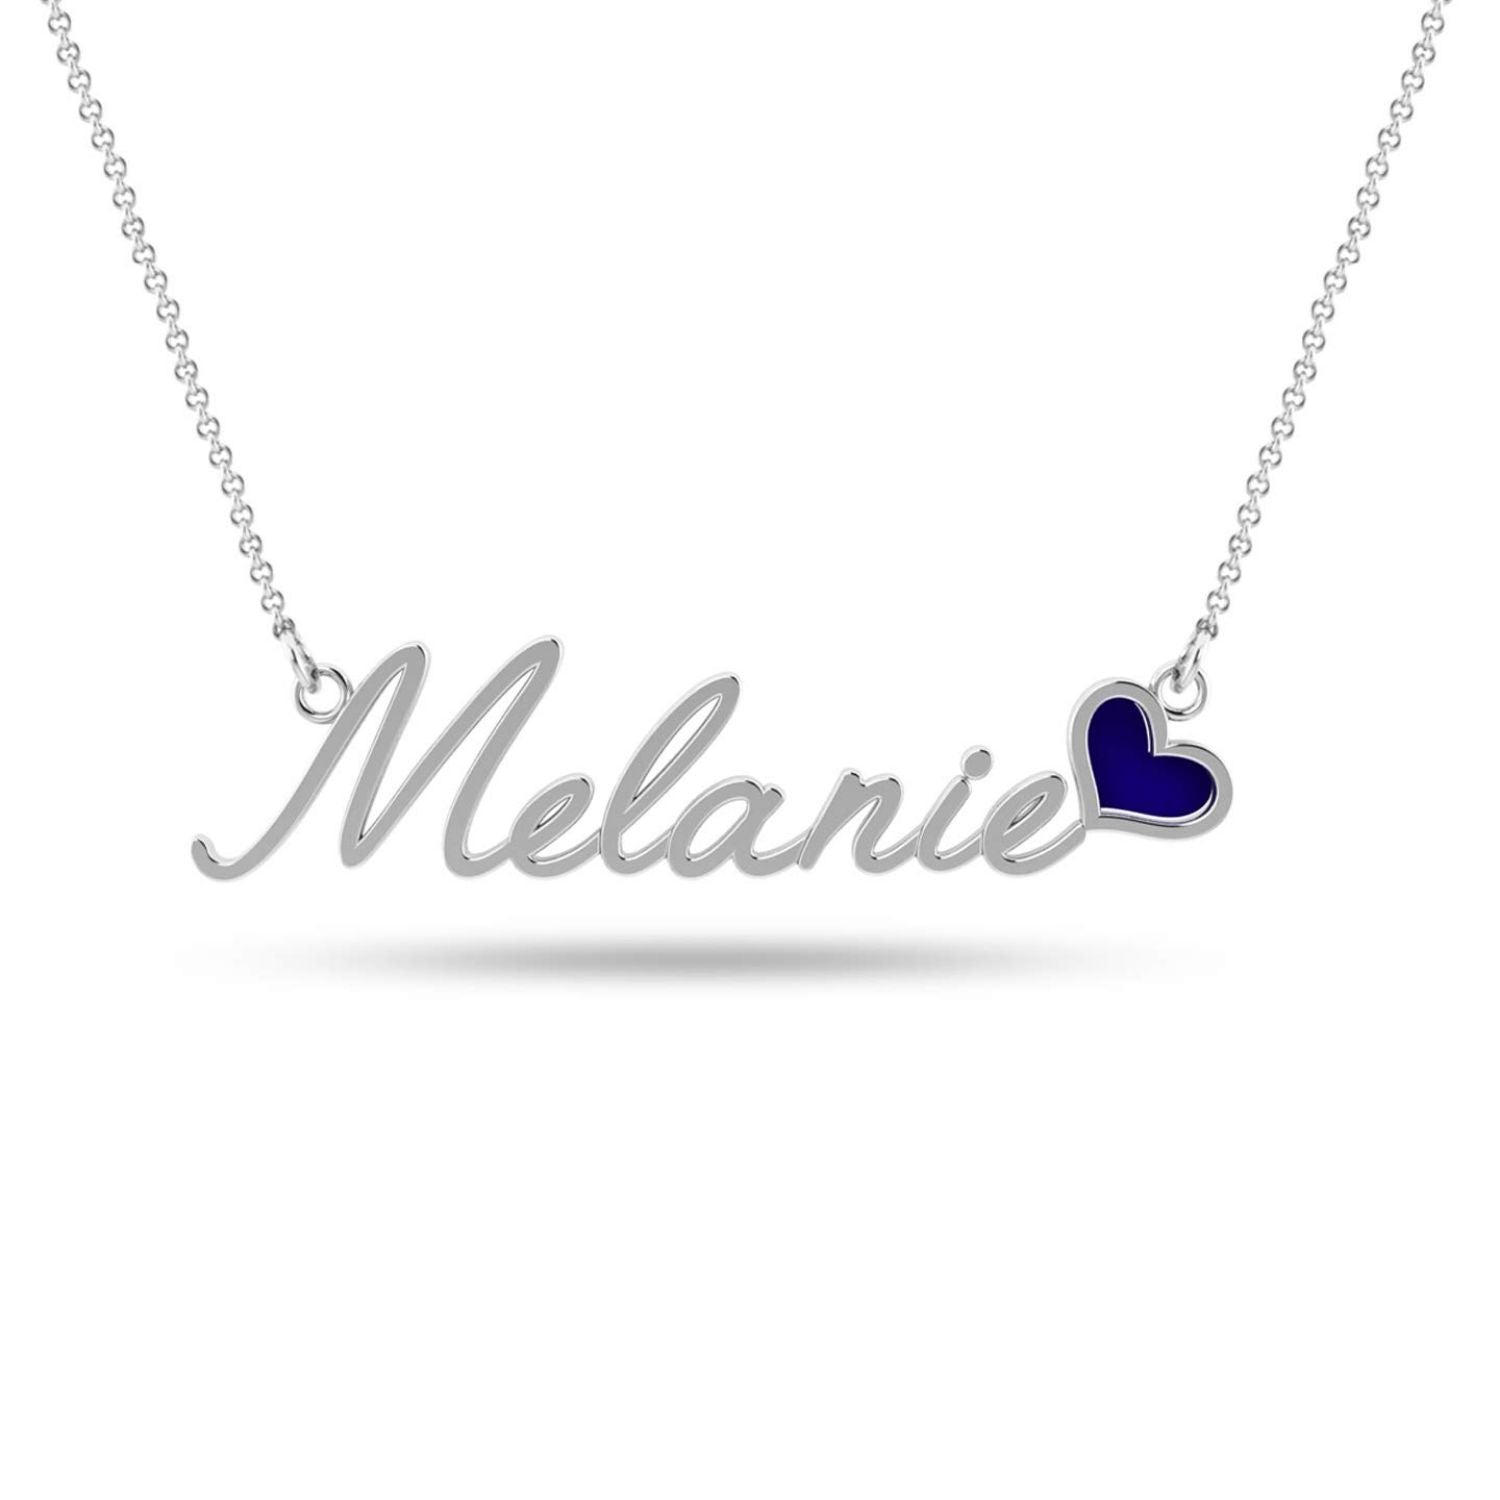 Personalised 925 Sterling Silver Name Heart Necklace for Teen Women